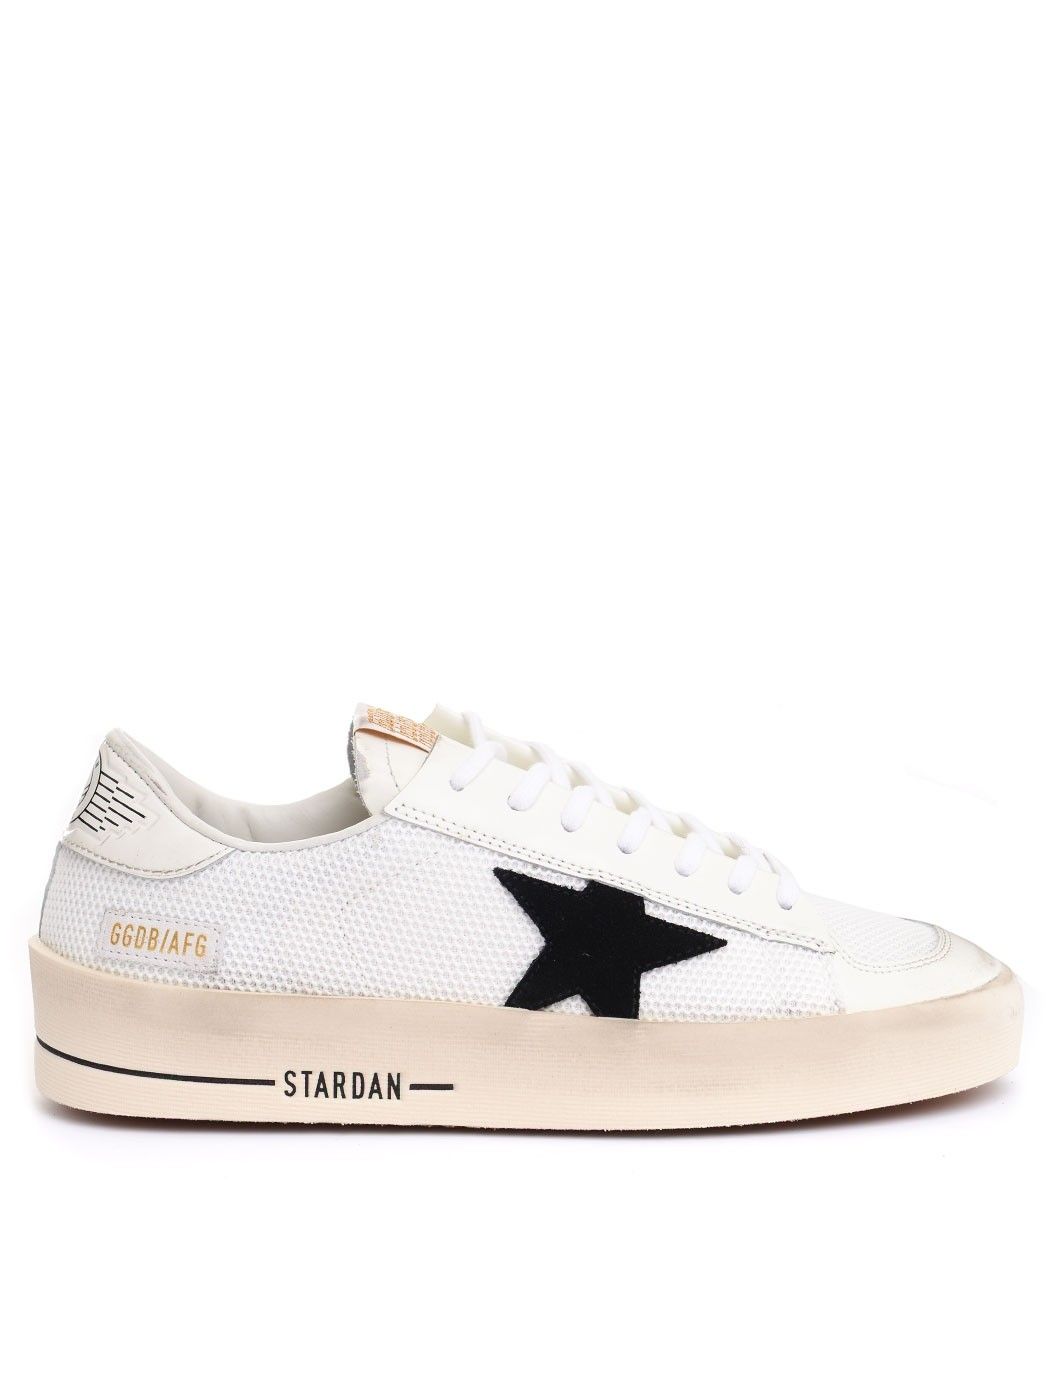  WOMAN SHOES,GIVENCHY SHOES,GOLDEN GOOSE SHOES,MARNI SHOES  GOLDEN GOOSE GWF00328